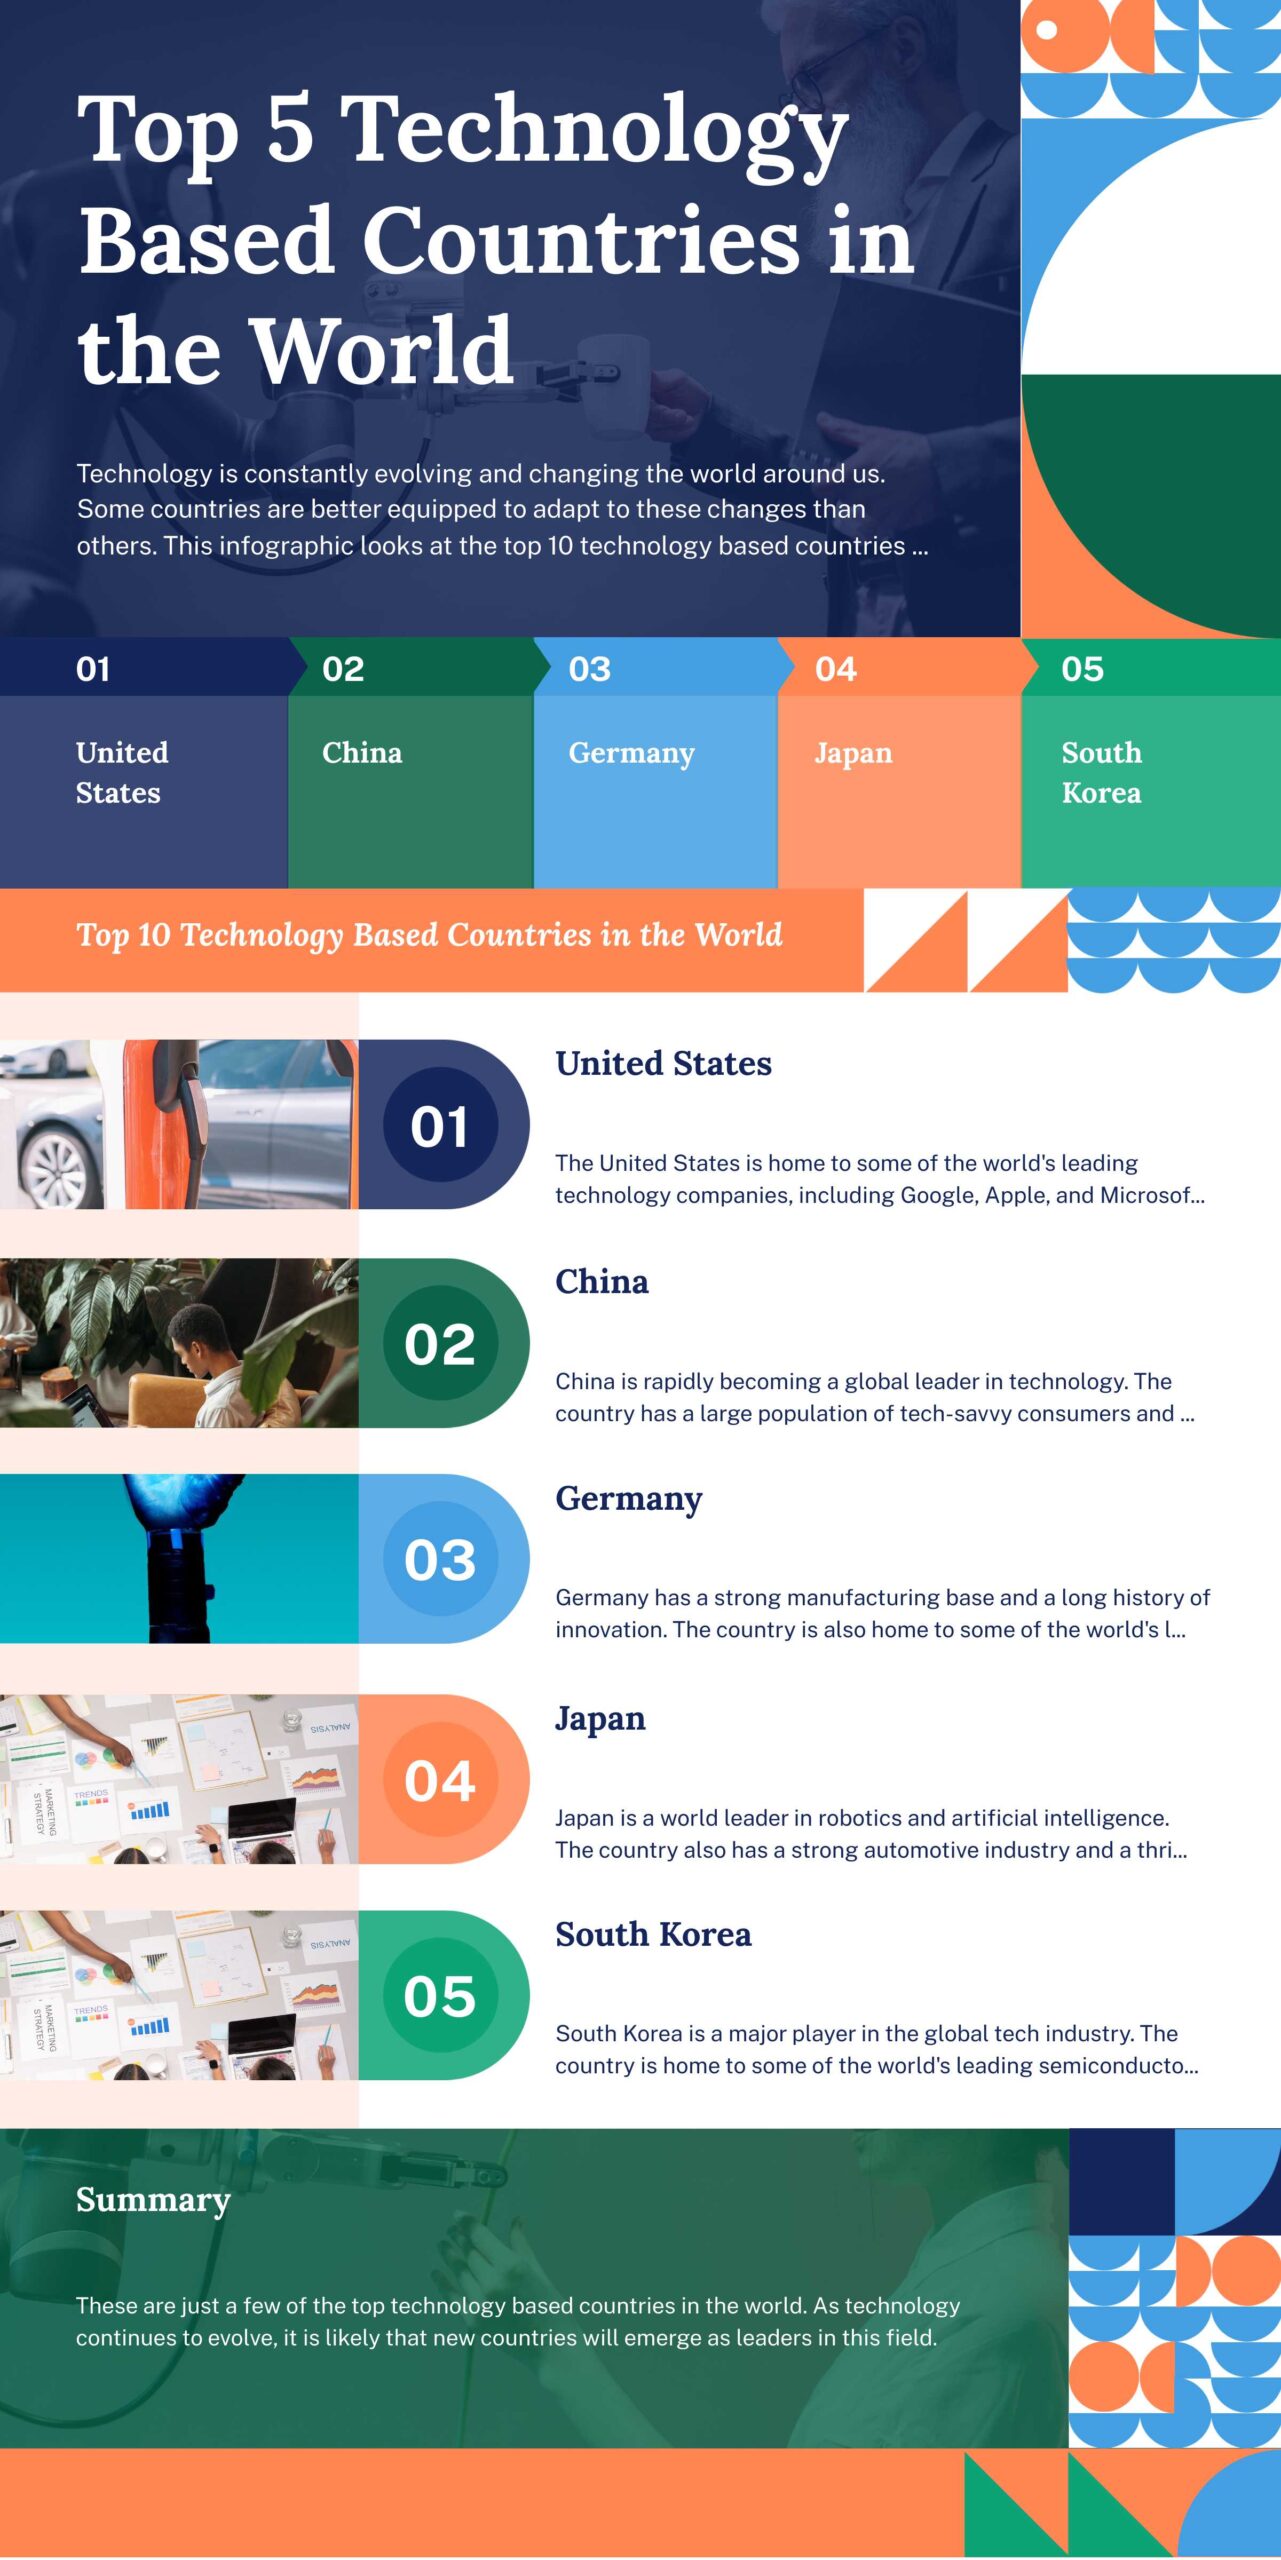 Top 5 Technology Based Countries in the World